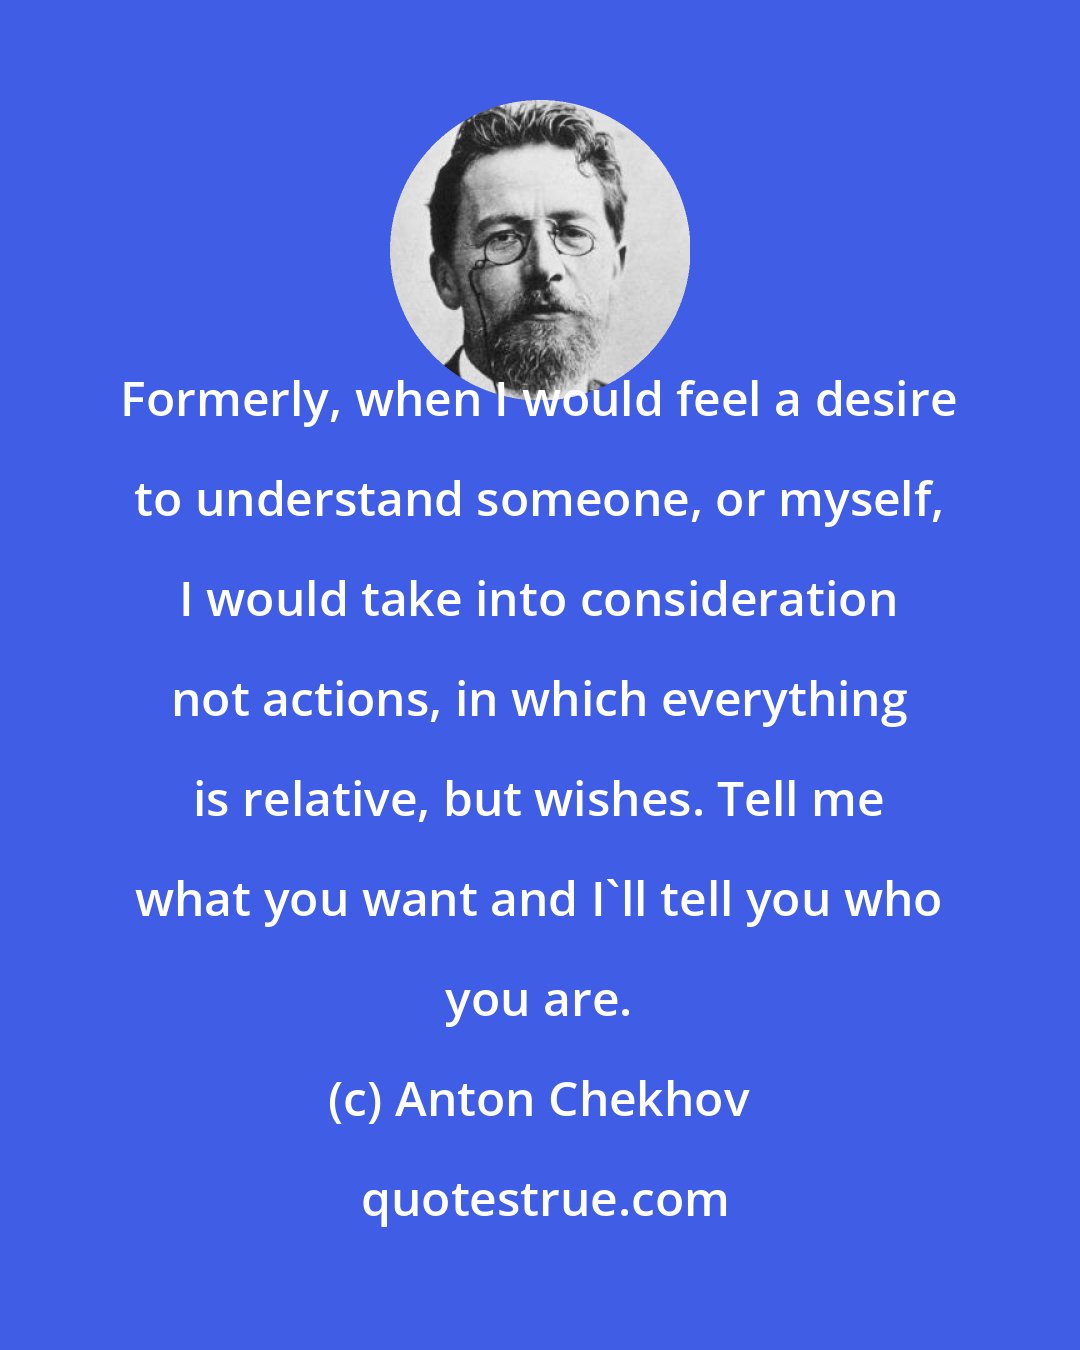 Anton Chekhov: Formerly, when I would feel a desire to understand someone, or myself, I would take into consideration not actions, in which everything is relative, but wishes. Tell me what you want and I'll tell you who you are.